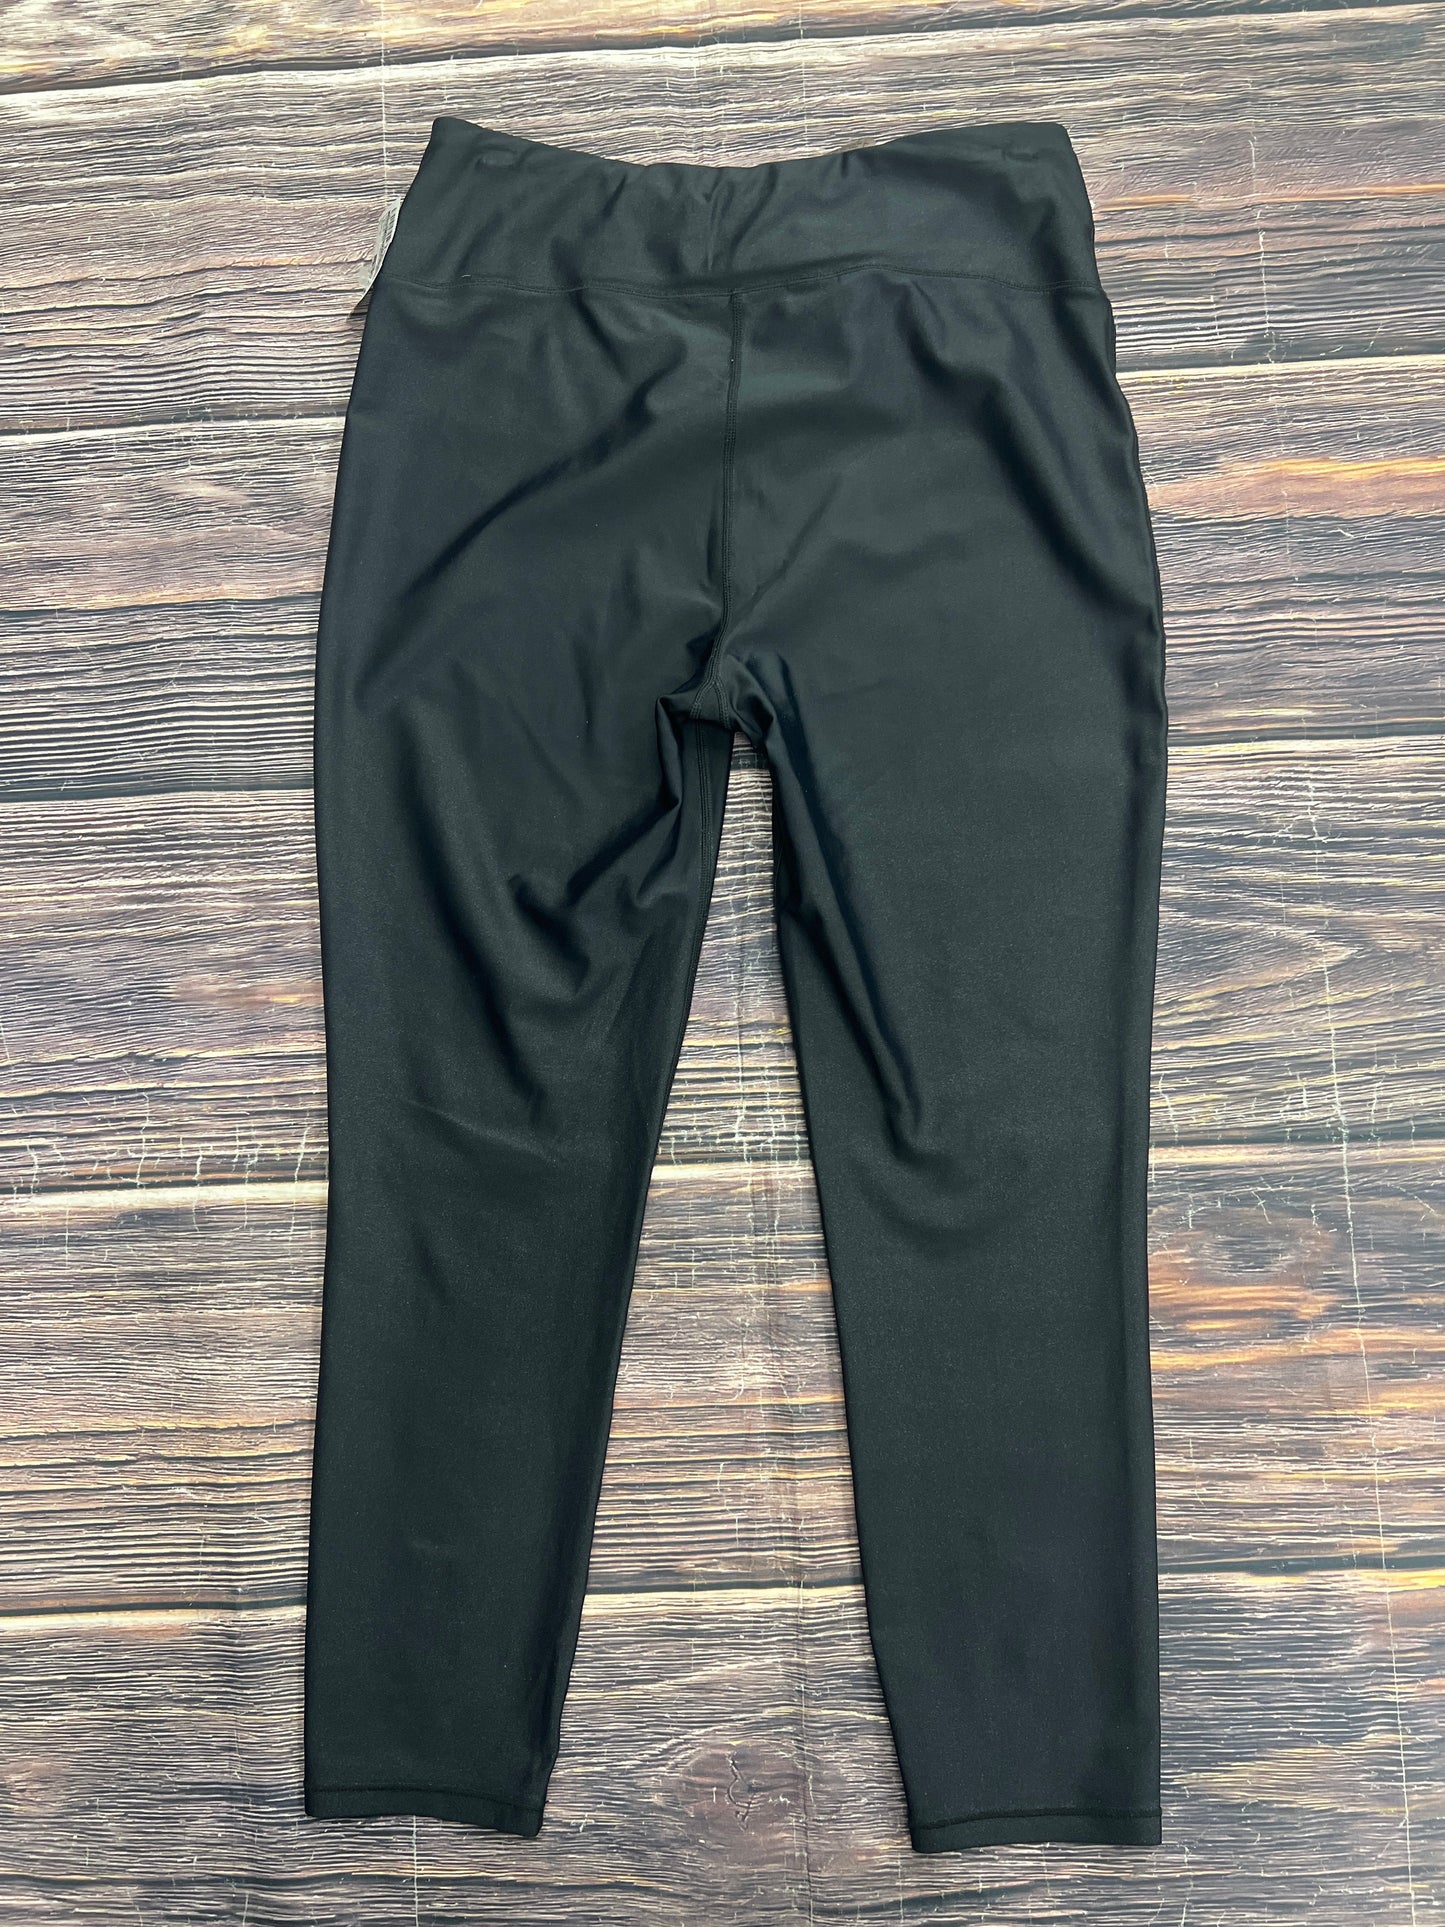 Athletic Leggings By Good American  Size: S